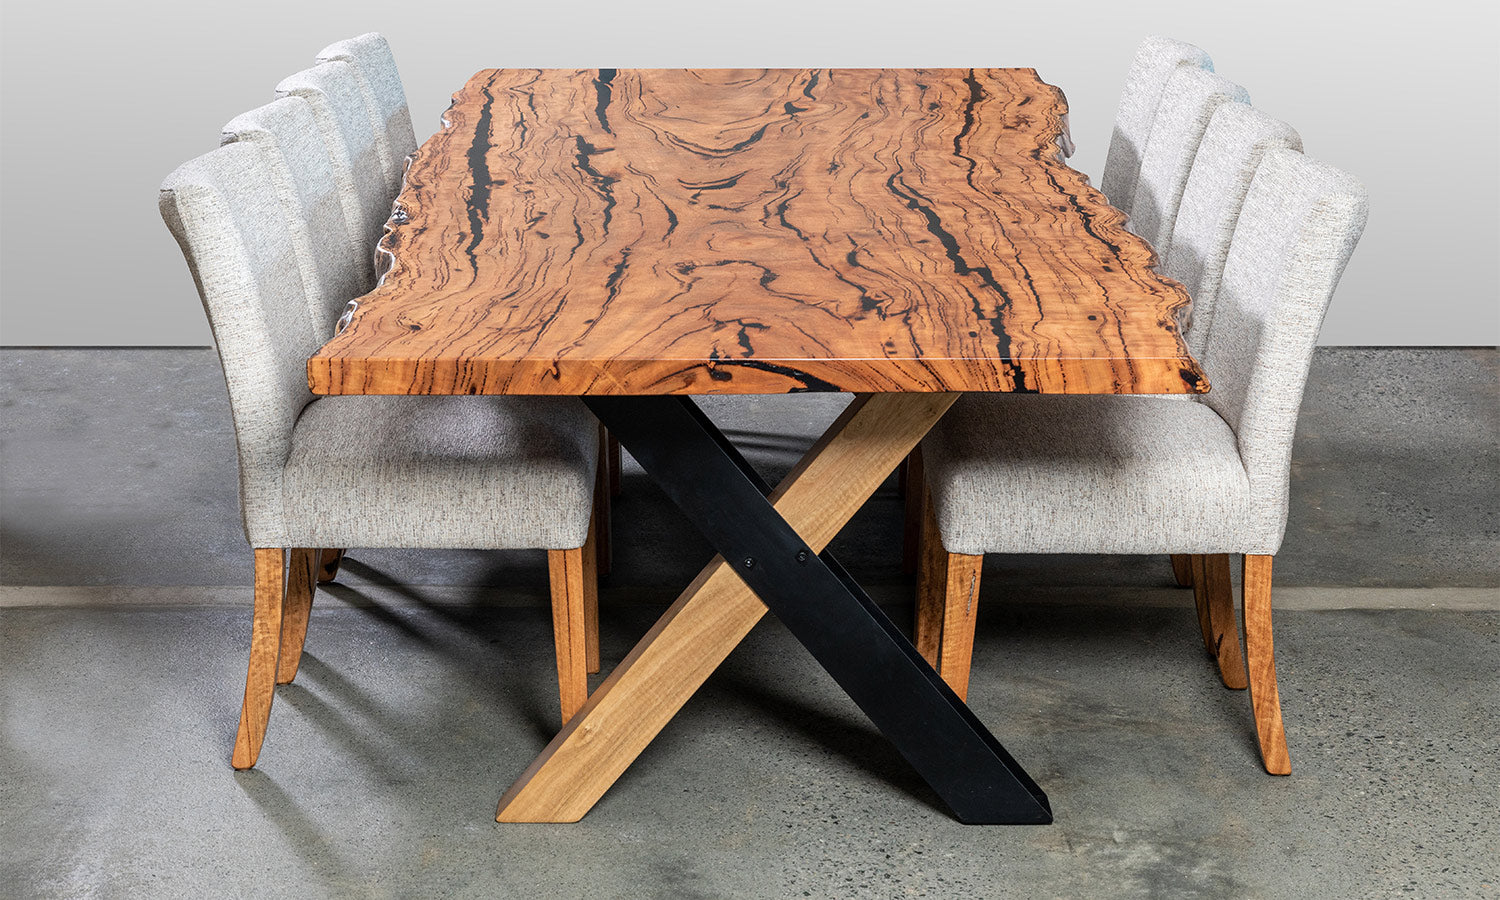 Intwine Solid Marri Timber Slab Dining Table with hybrid wood metal x shaped base made in Perth, WA